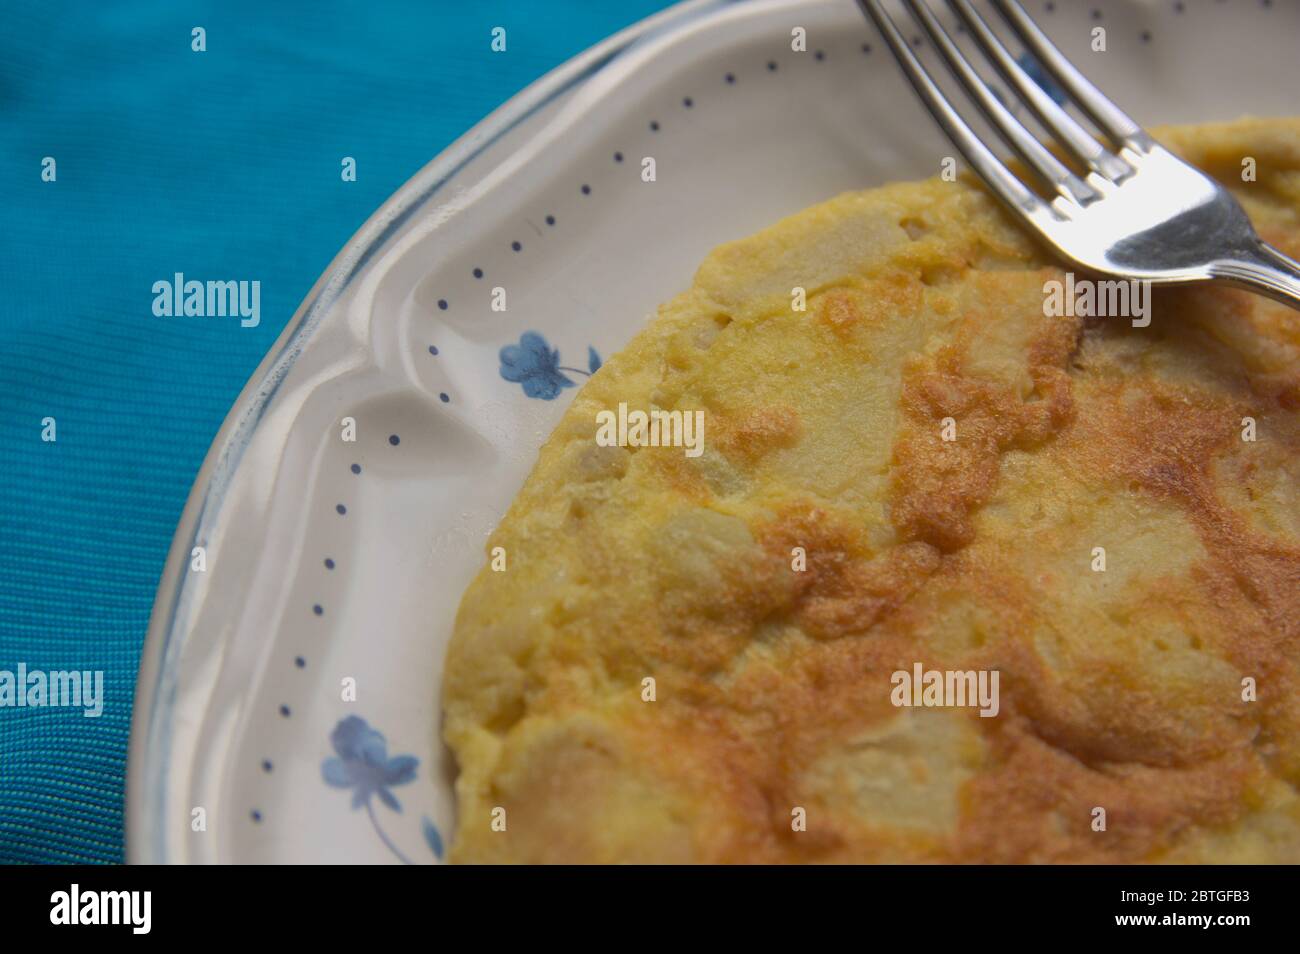 Closeup of a plate with a Spanish omelette or potato next to a fork ready to eat Stock Photo